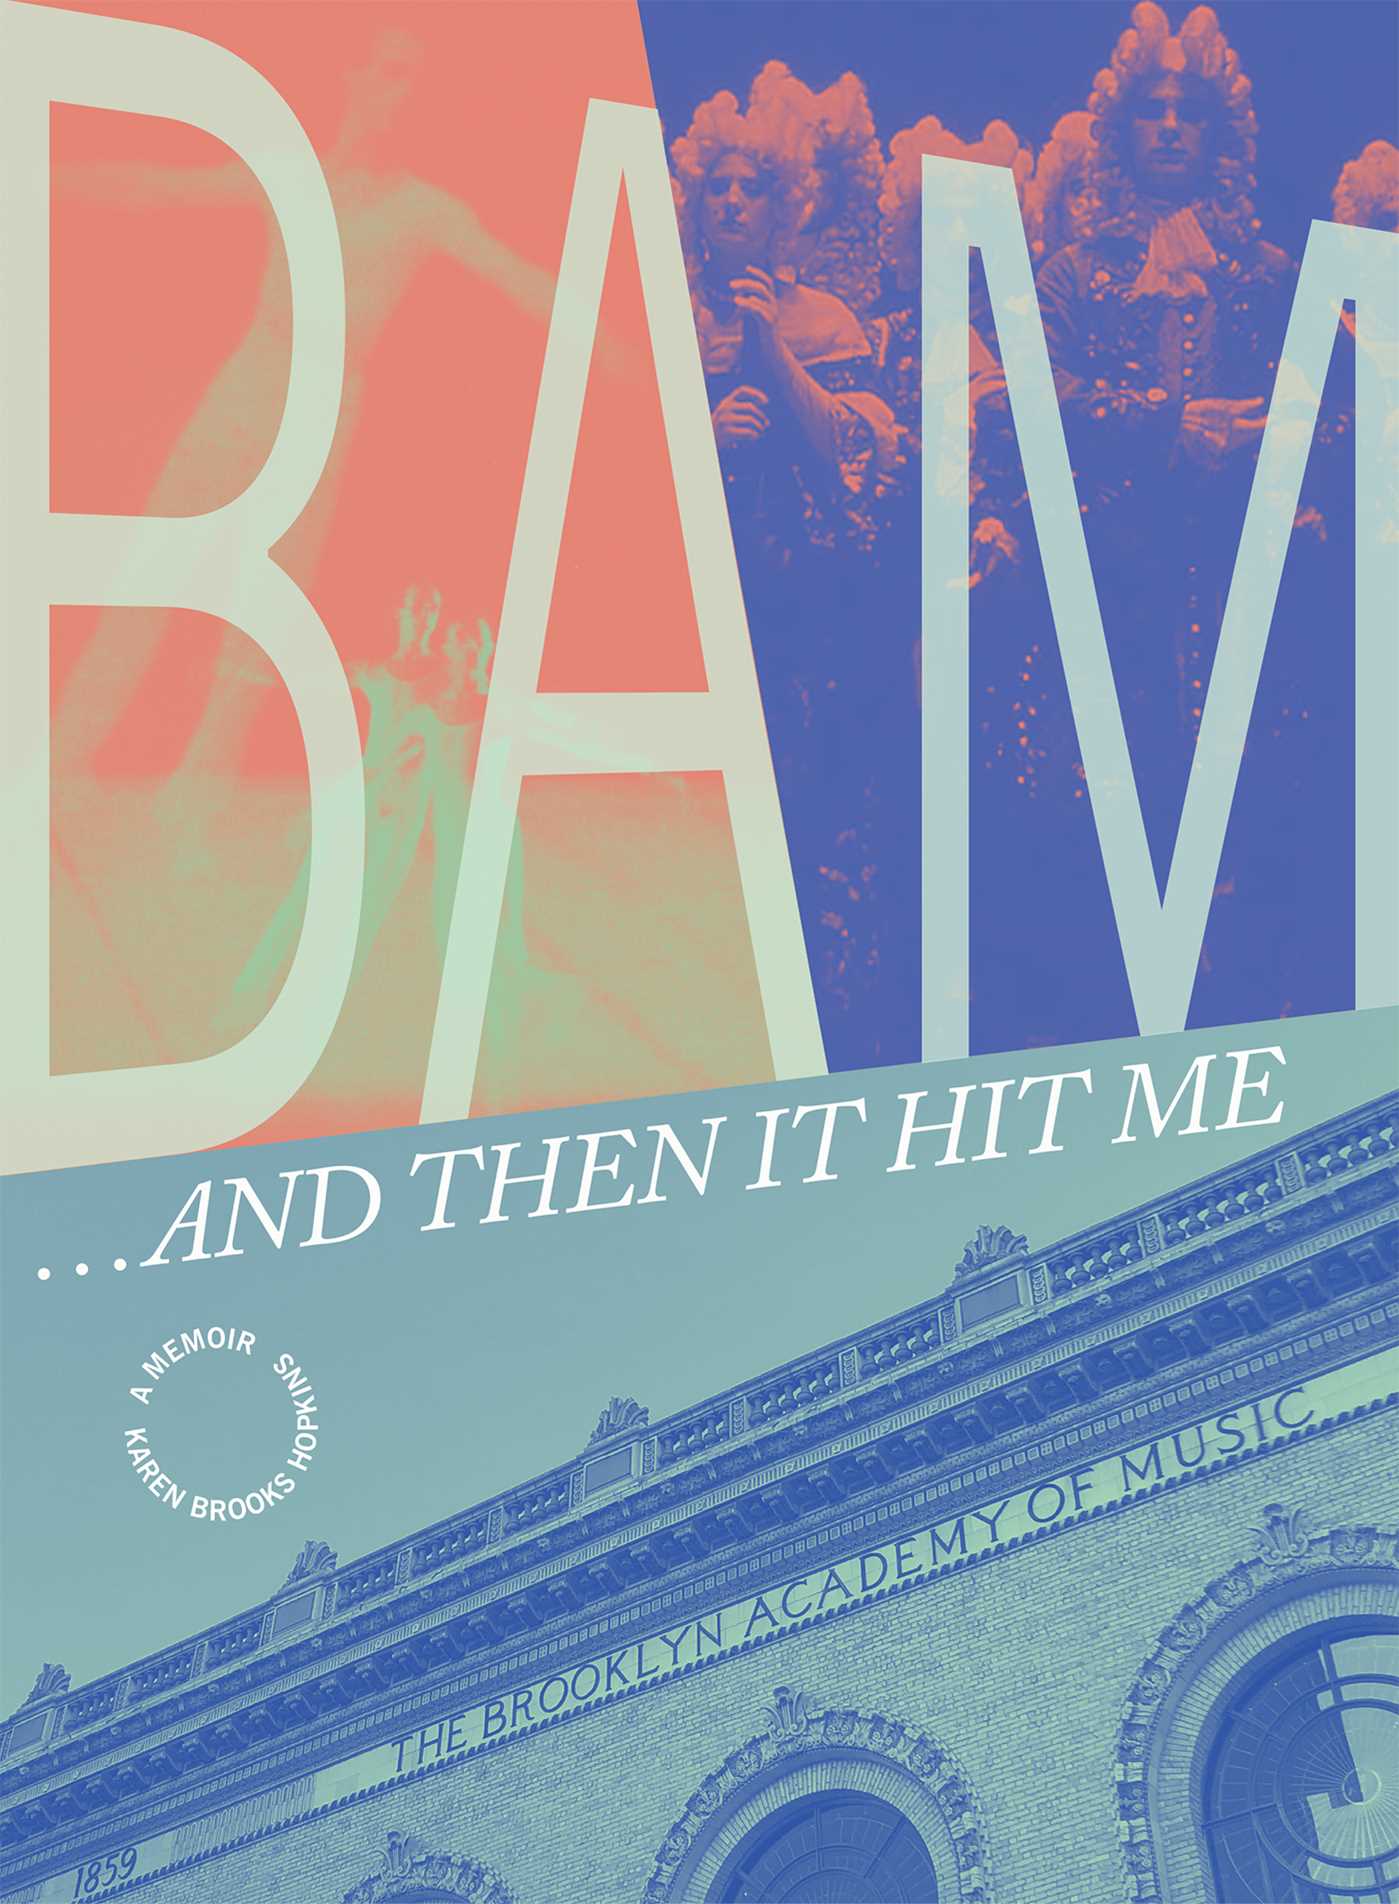 powerHouse Book Launch & Brooklyn Book Festival Bookends Event: BAM... and Then It Hit Me by Karen Brooks Hopkins in conversation with John Turturro